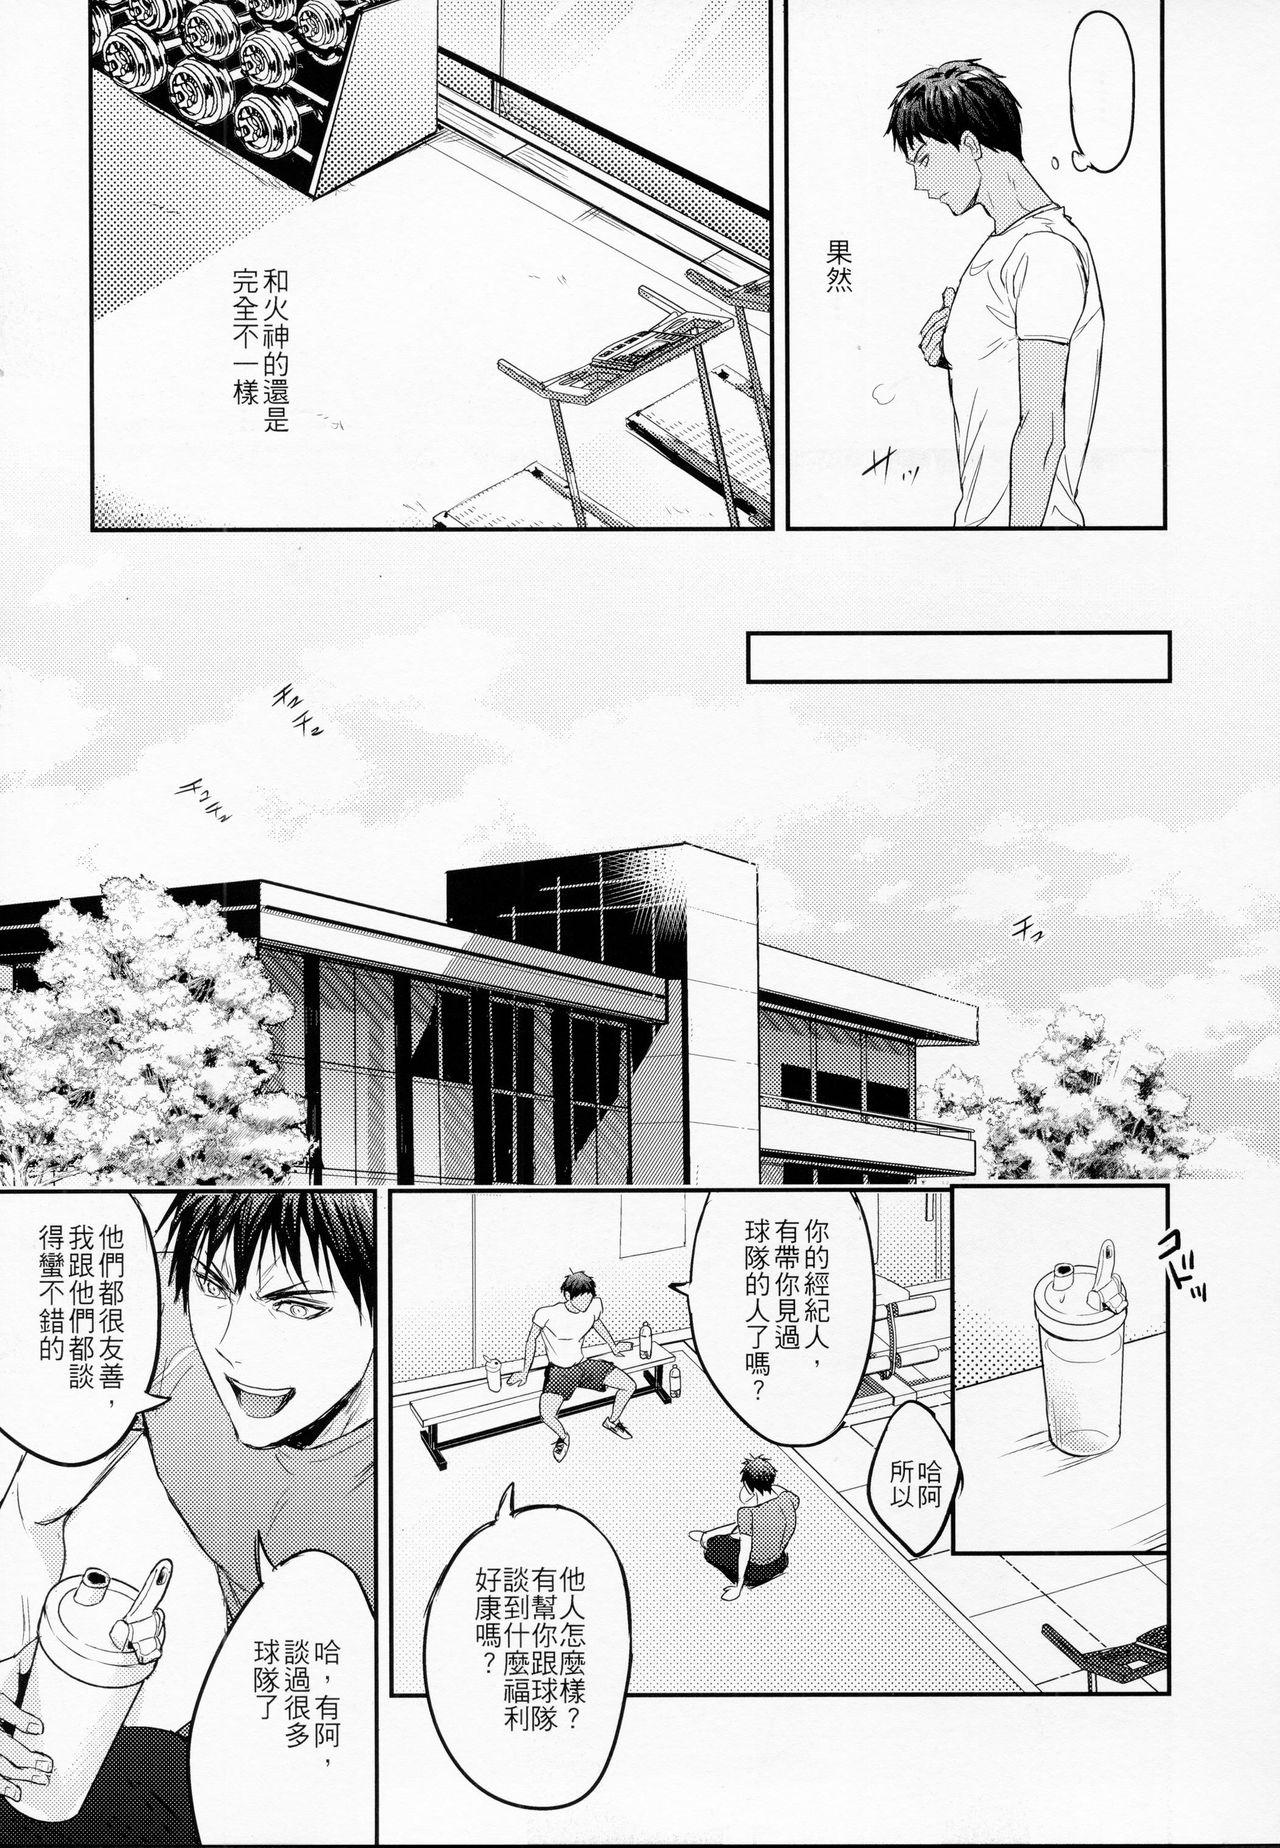 Real This is how we WORK IT OUT - Kuroko no basuke Hardcore Free Porn - Page 6